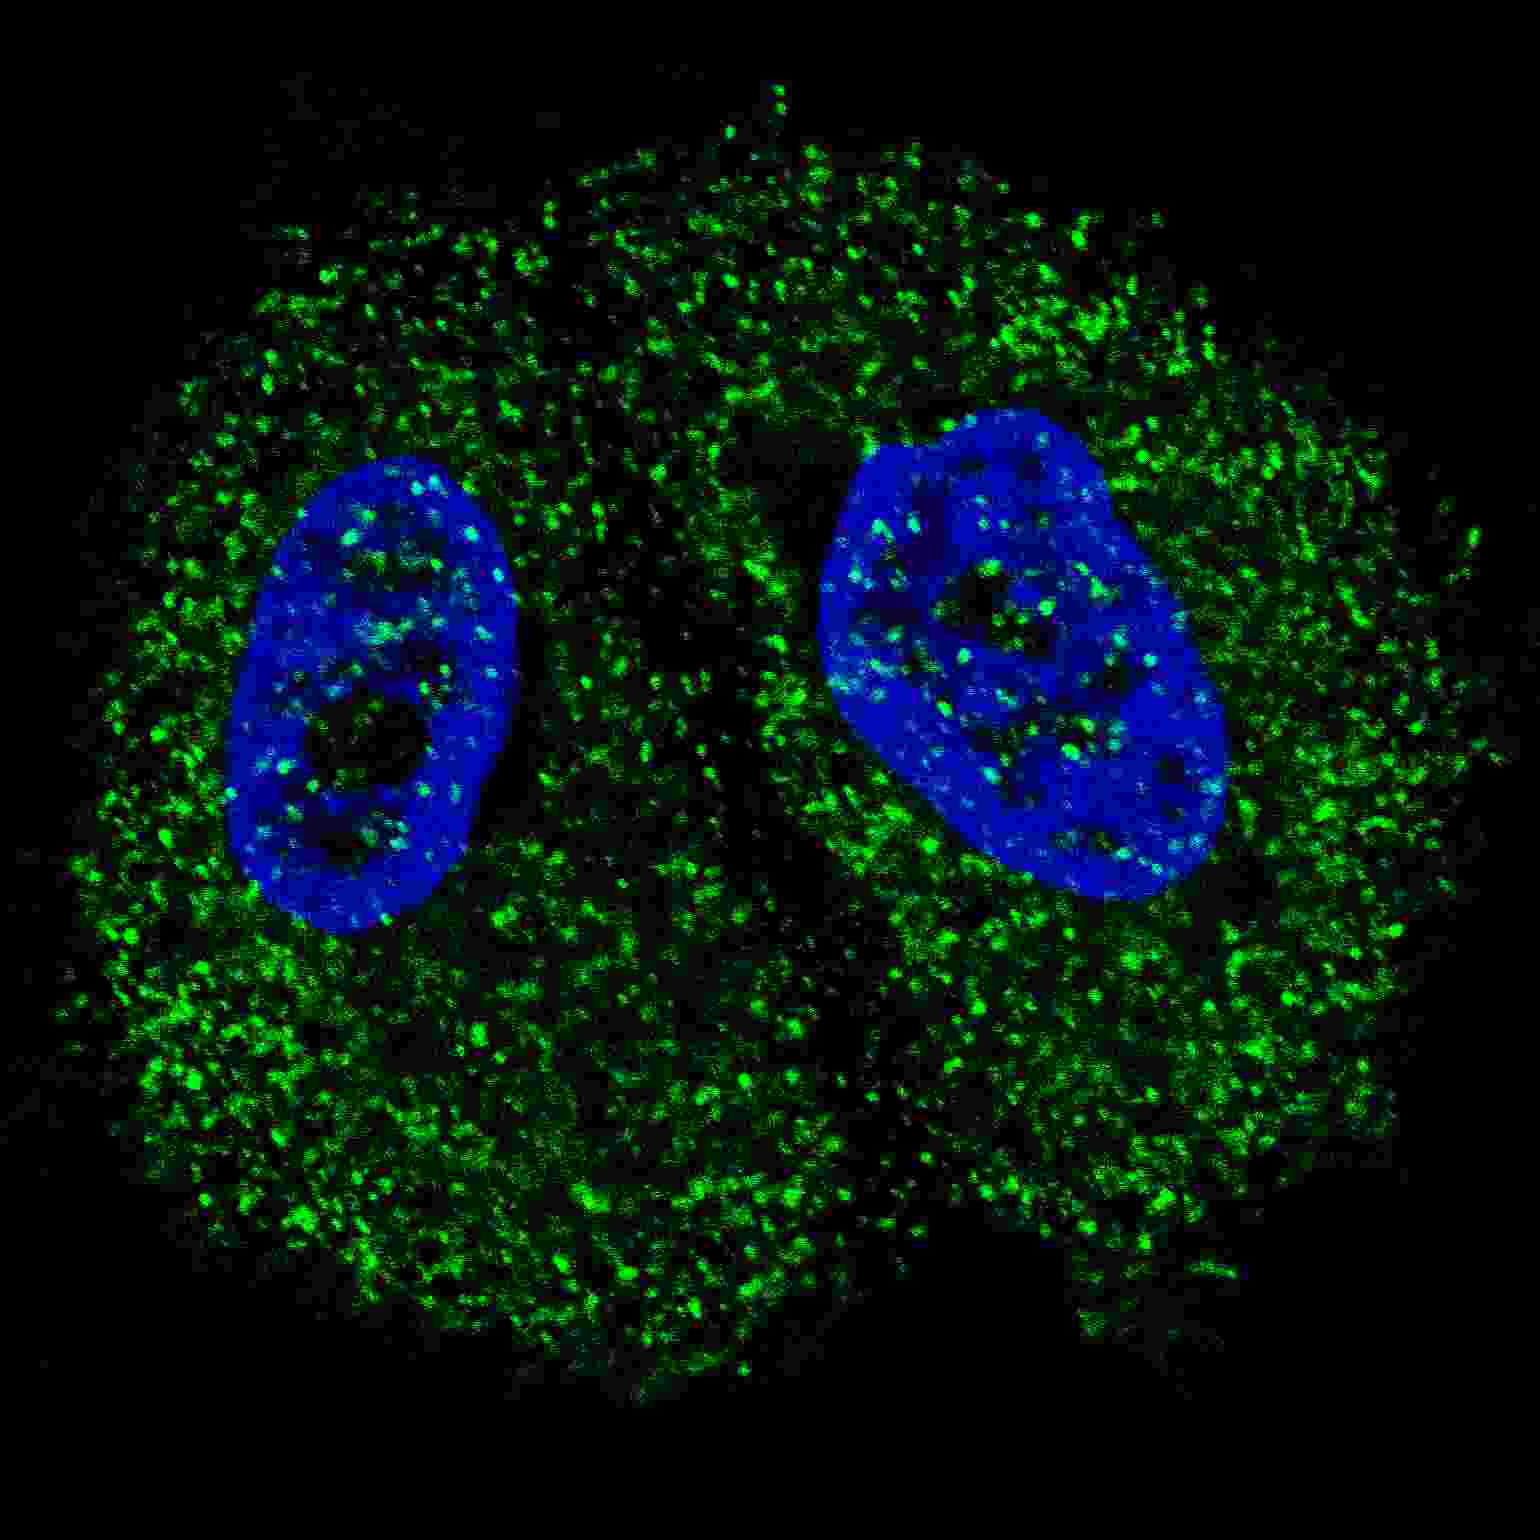 Fluorescent confocal image of MCF7 cells stained with Pyruvate Kinase (PKM2) (C-term) antibody. MCF7 cells were fixed with 4% PFA (20 min), permeabilized with Triton X-100 (0.2%, 30 min). Cells were then incubated with AP7044b Pyruvate Kinase (PKM2) (C-term) primary antibody (1:200, 2 h at room temperature). For secondary antibody, Alexa Fluor� 488 conjugated donkey anti-rabbit antibody (green) was used (1:1000, 1h). Nuclei were counterstained with Hoechst 33342 (blue) (10 ?g/ml, 5 min). Note the highly specific localization of the Pyruvate Kinase (PKM2) mainly to the cytoplasm, supported by Human Protein Atlas Data (http://www.proteinatlas.org/ENSG00000067225).